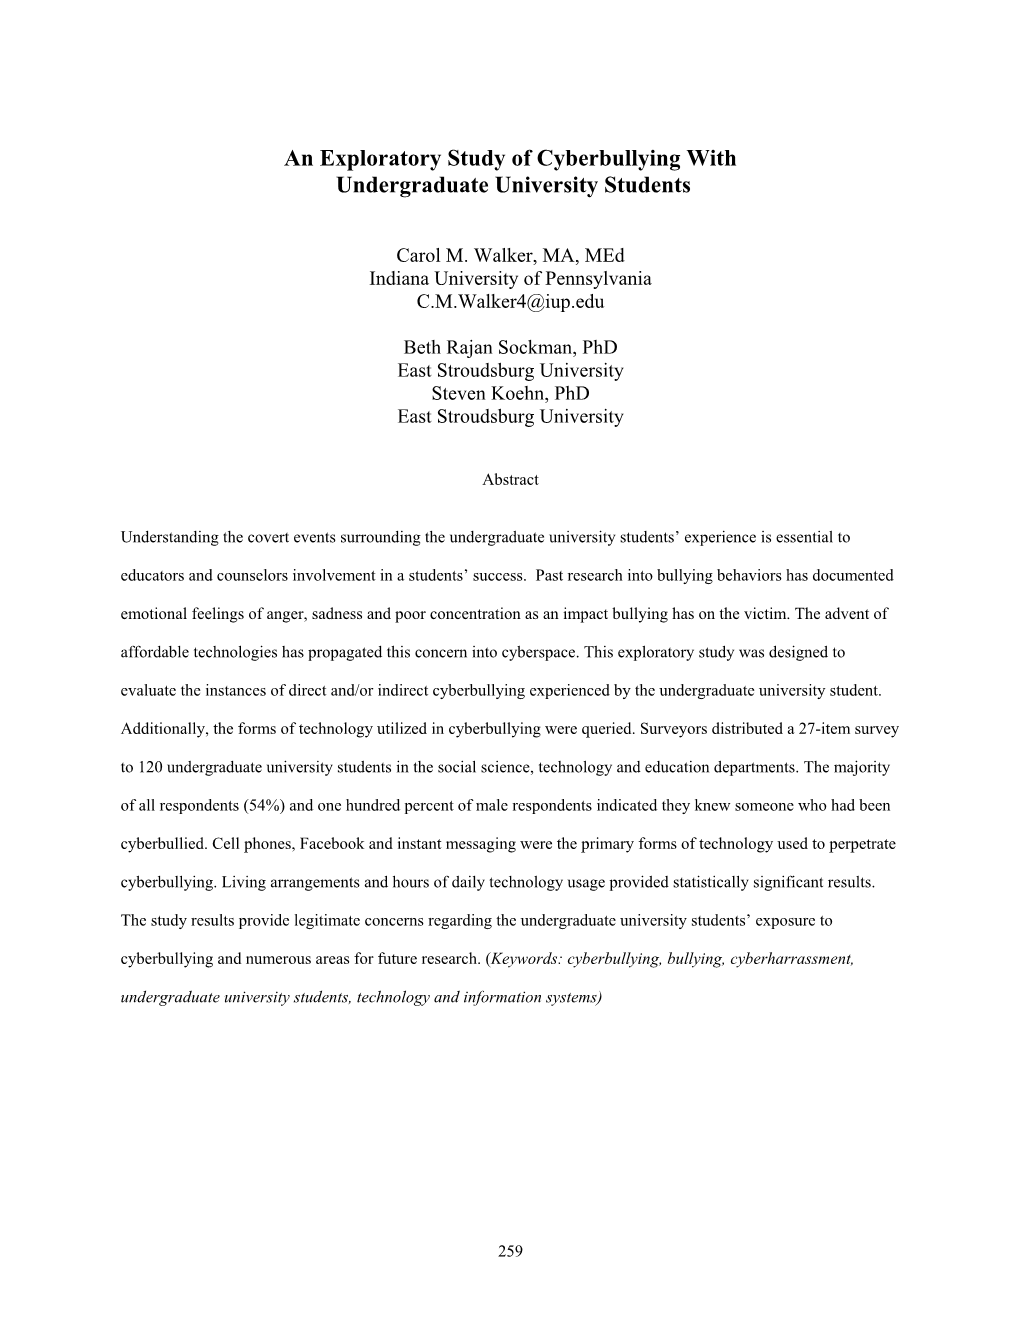 An Exploratory Study of Cyberbullying with Undergraduate University Students